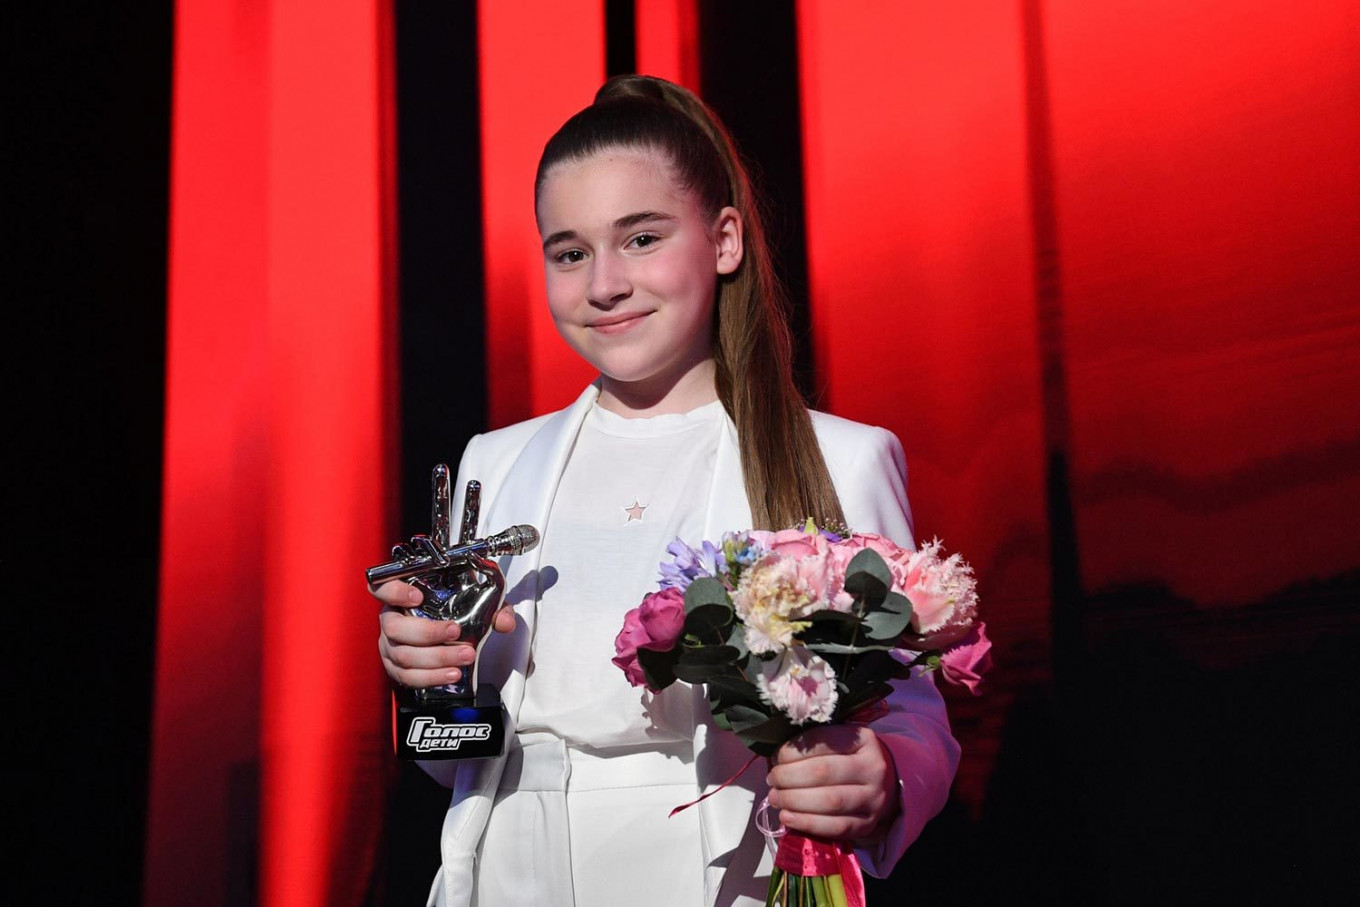 Russian TV Cancels ‘The Voice Kids’ Results After Mass Vote Rigging